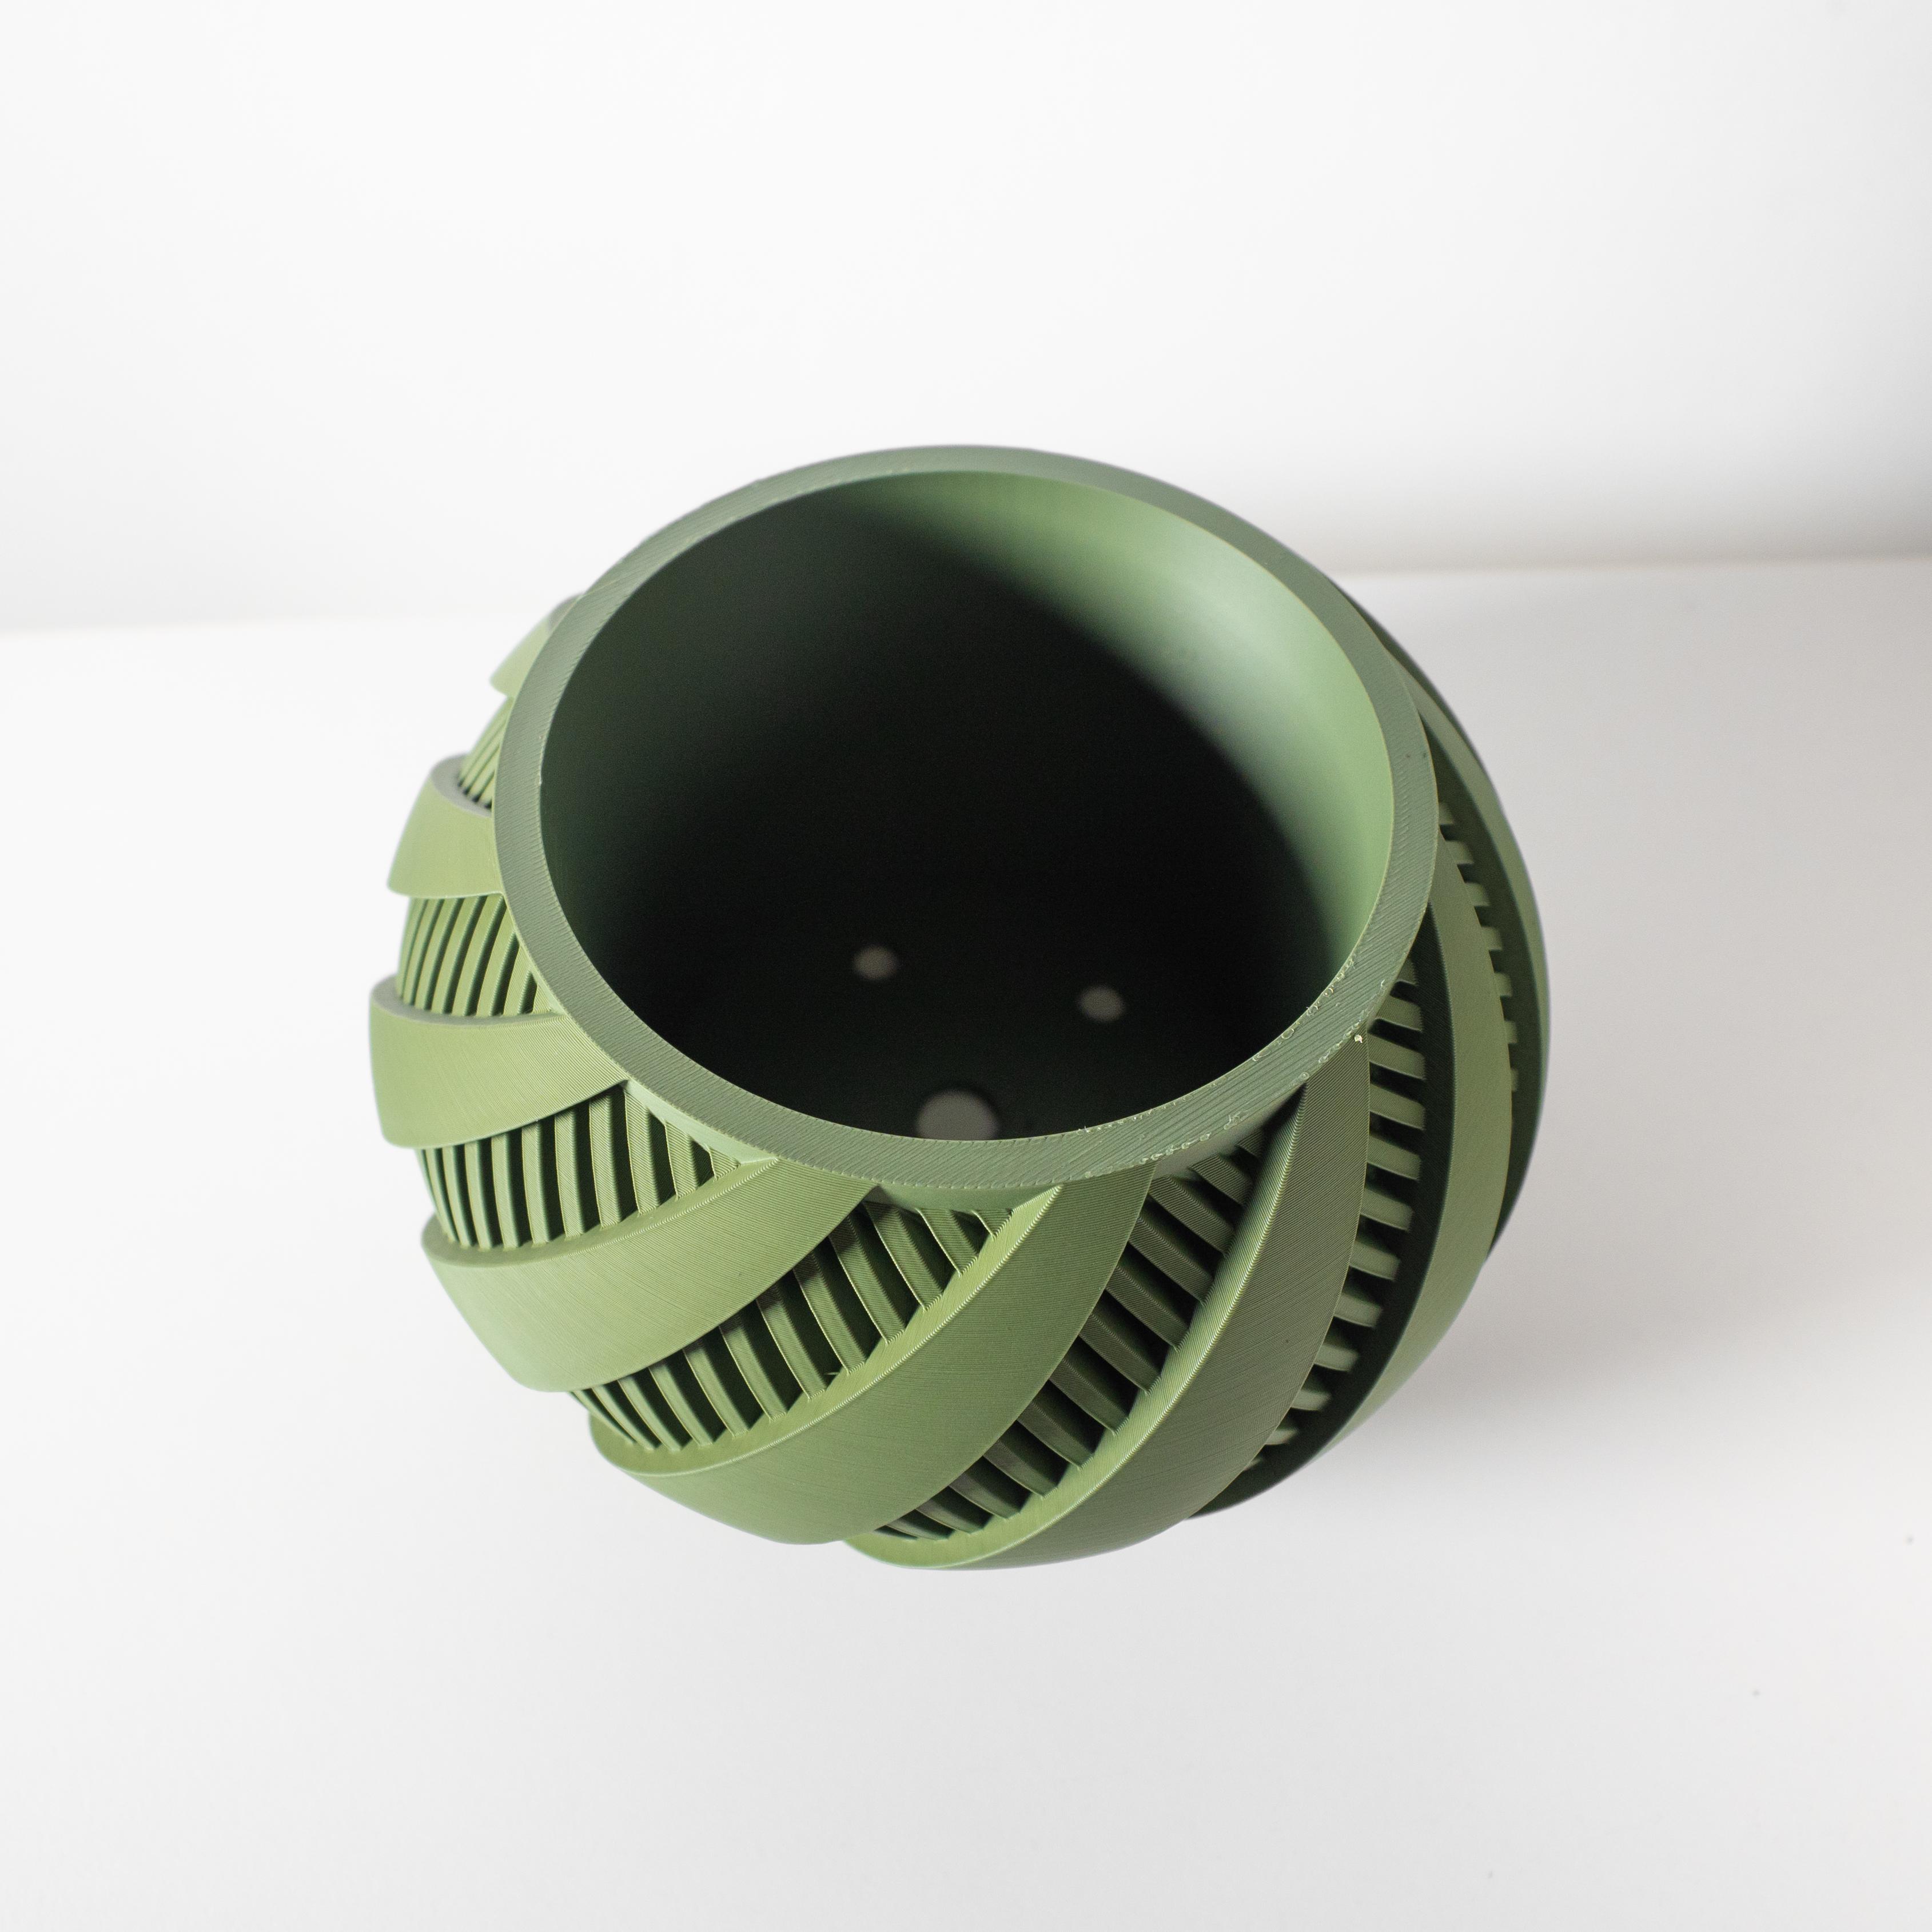 The Krato Planter Pot with Drainage Tray & Stand Included: Modern and Unique Home Decor for Plants 3d model